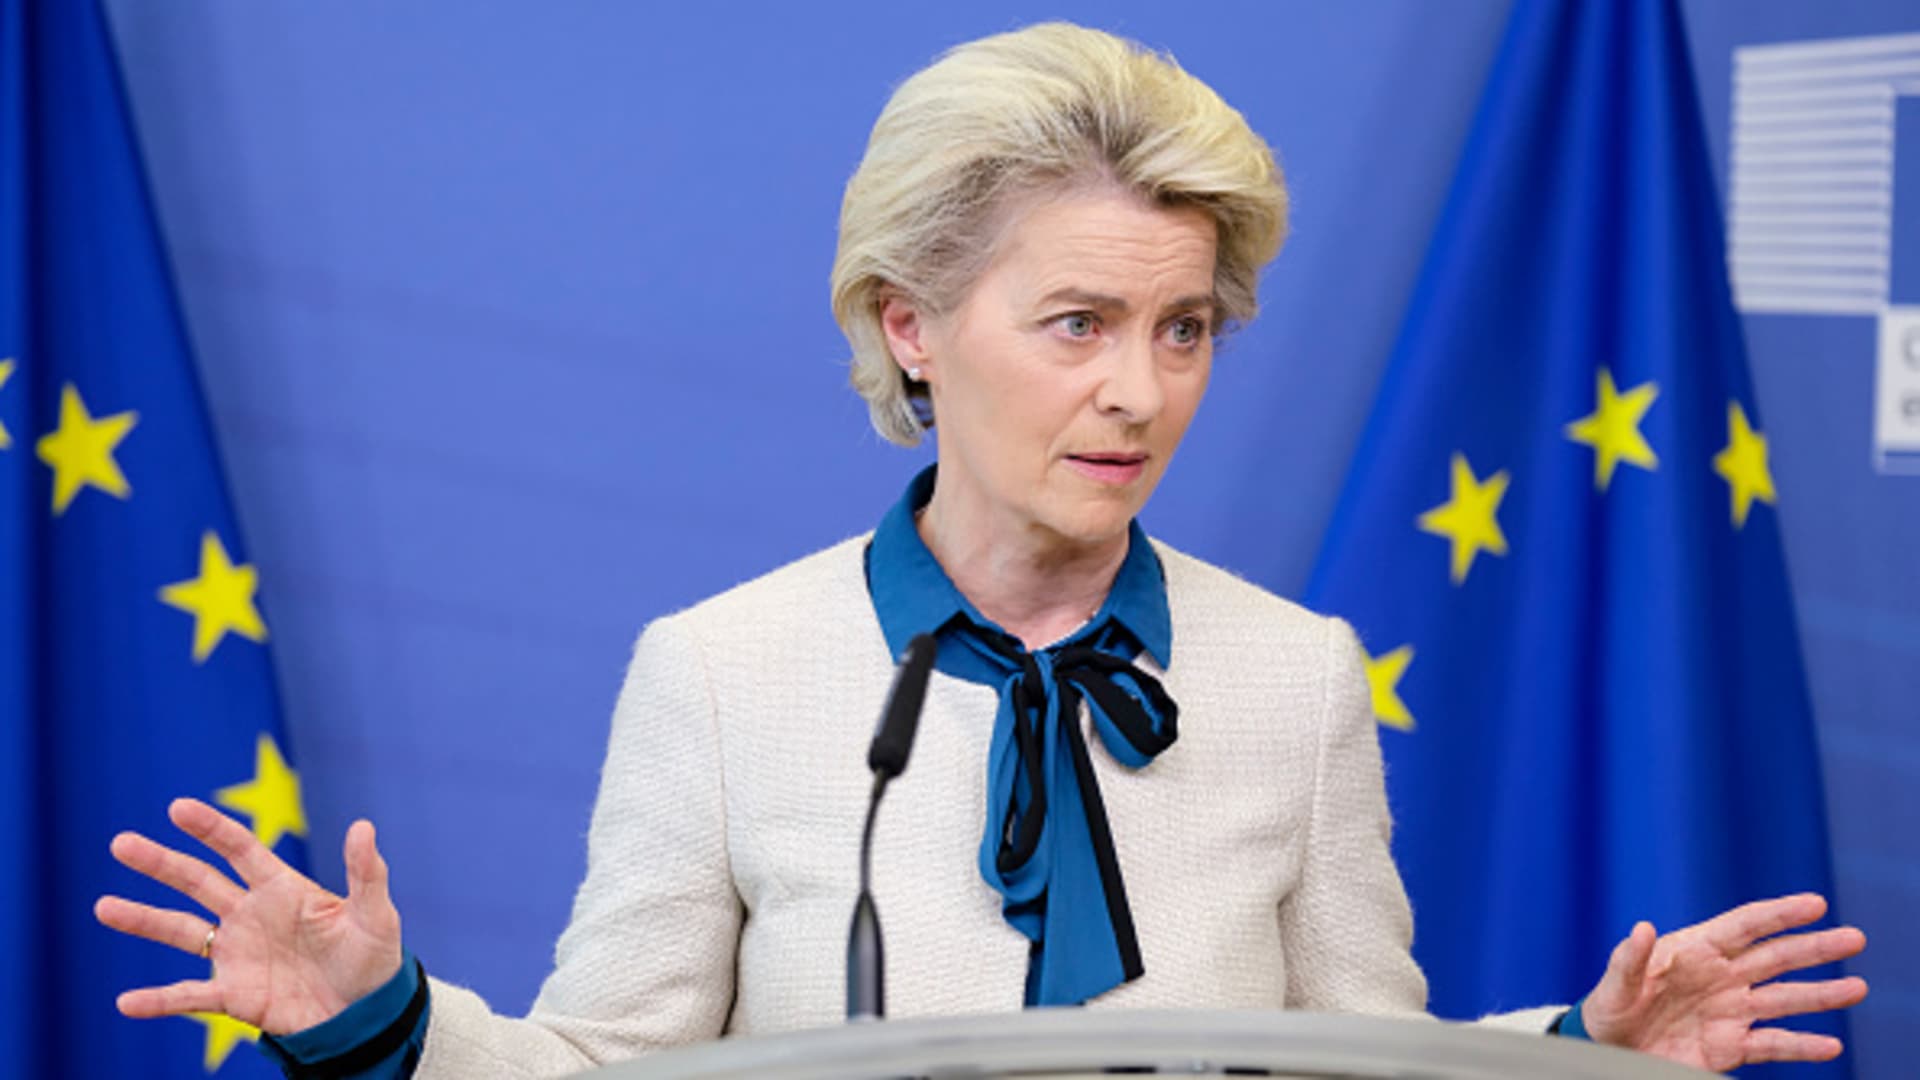 EU Commission President, Ursula von der Leyen talks to the media on May 18, 2022 in Brussels, Belgium. Today, the European Commission has presented the REPowerEU Plan, its response to the hardships and global energy market disruption caused by Russias invasion of Ukraine.